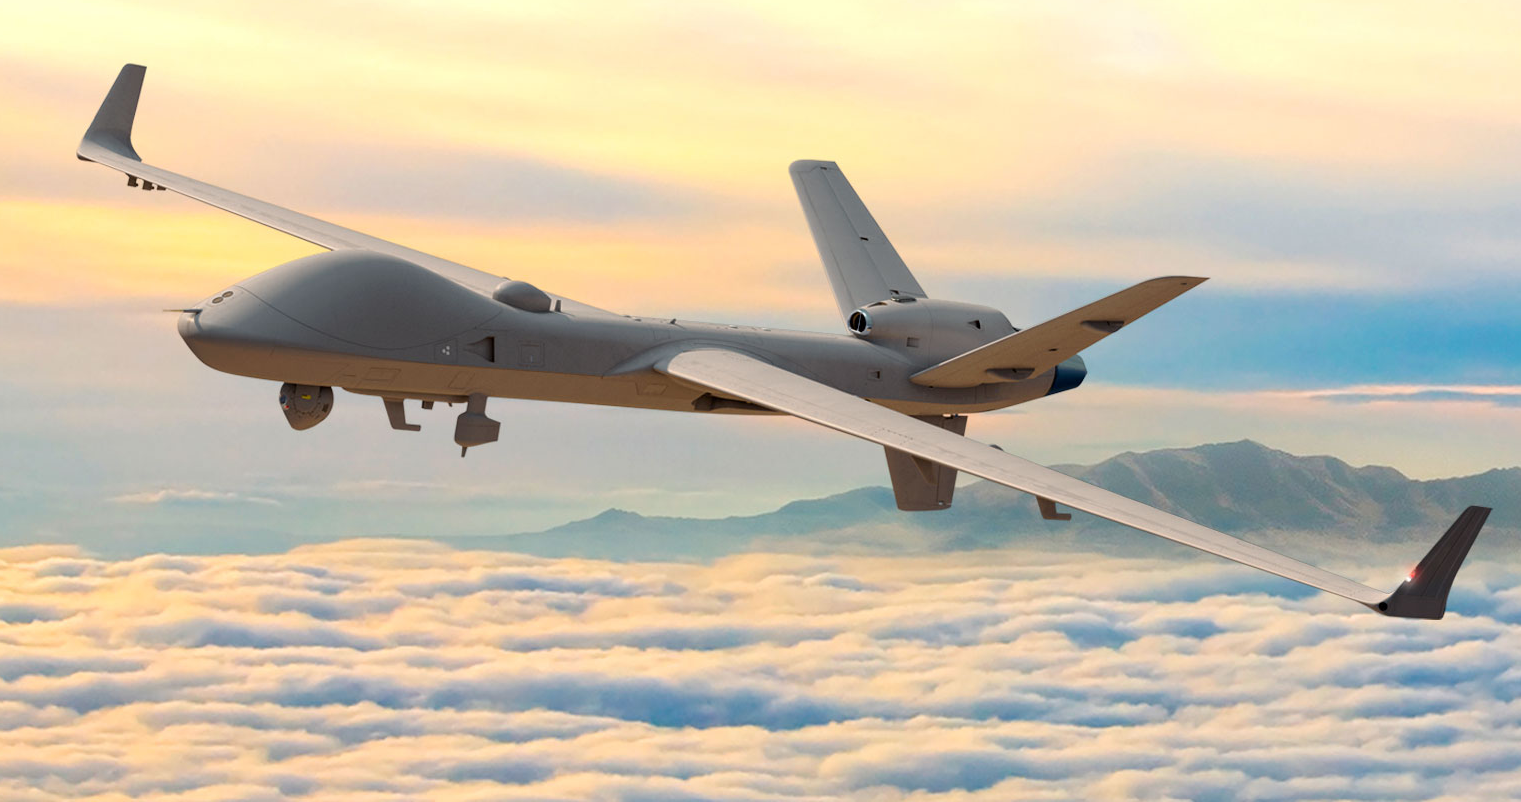 A gray General Atomics MQ-9B SkyGuardian is seen flying above the clouds. On the far right side of the background, a mountain range is seen peeking out. The scenery is tinged in the setting sun's orange hues.